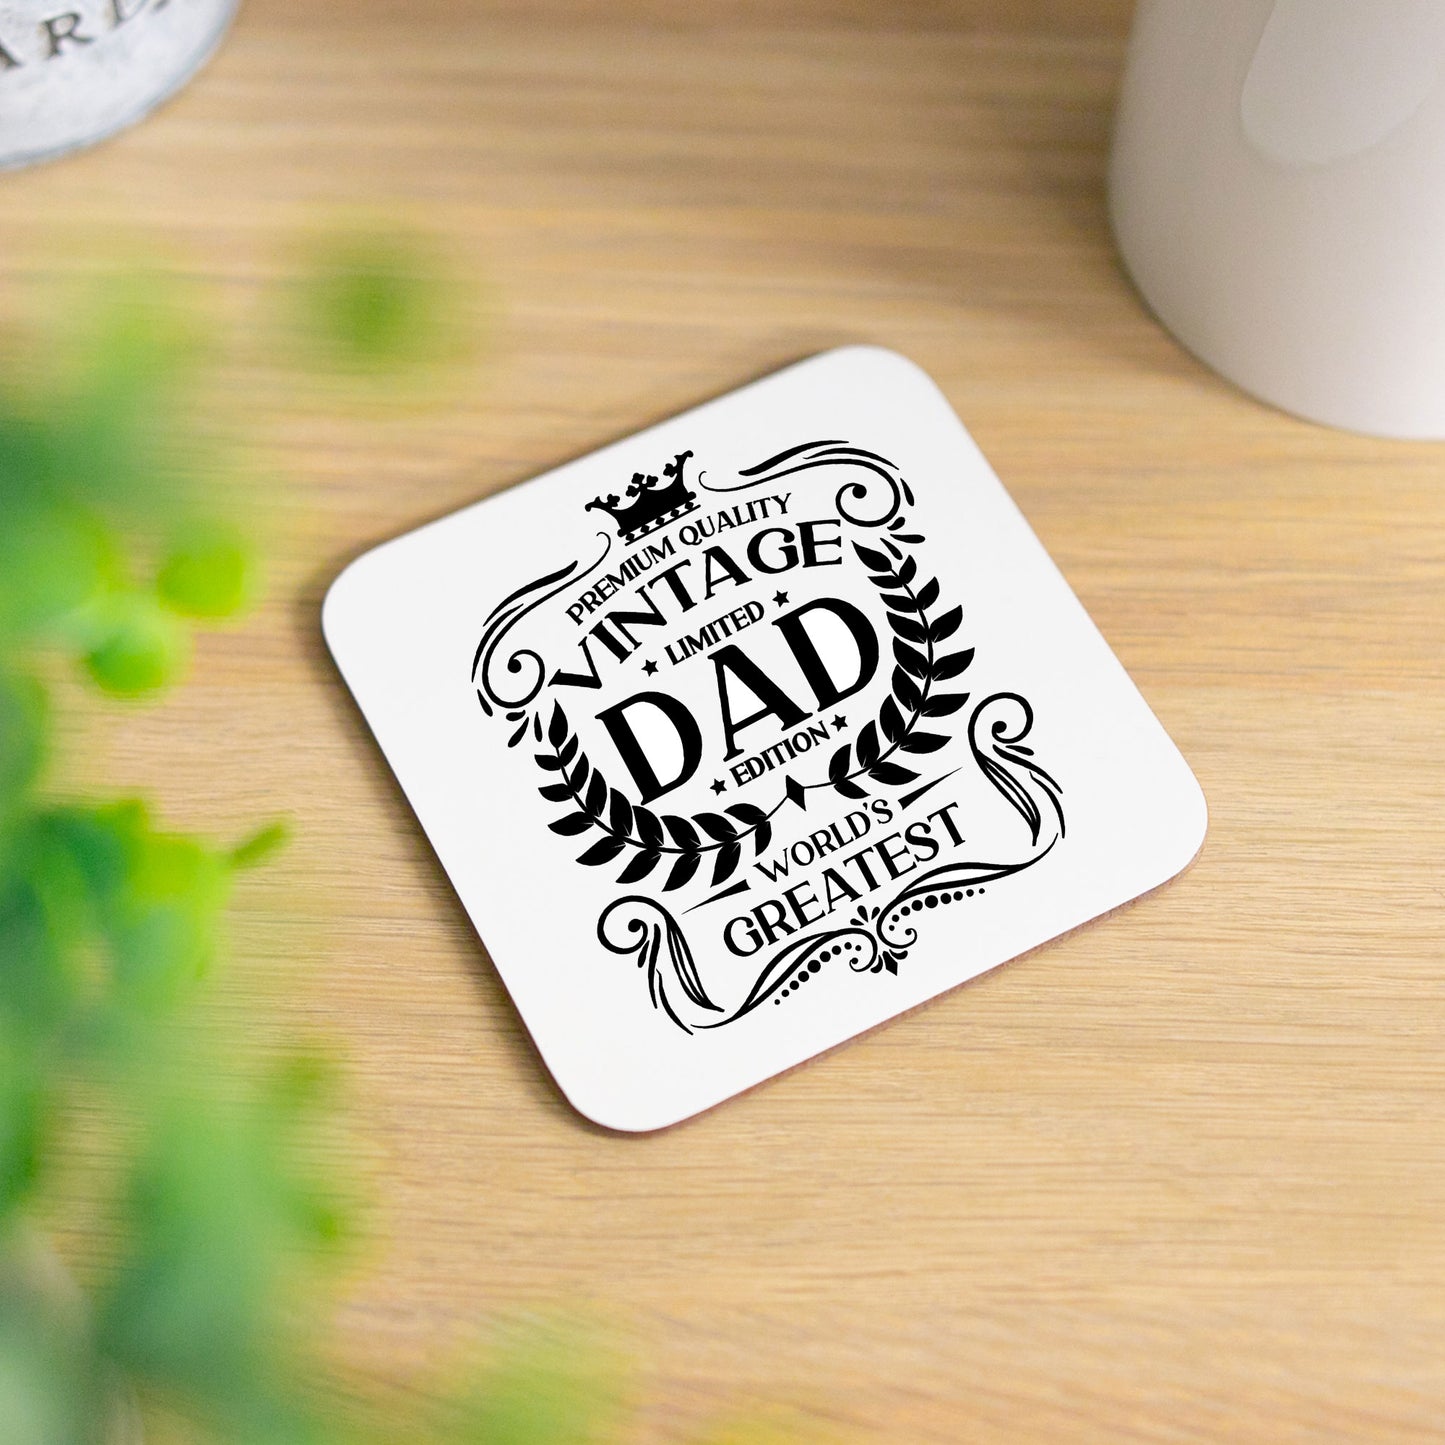 Vintage World's Greatest Dad Engraved Wine Glass Gift  - Always Looking Good - Printed Coaster Only  